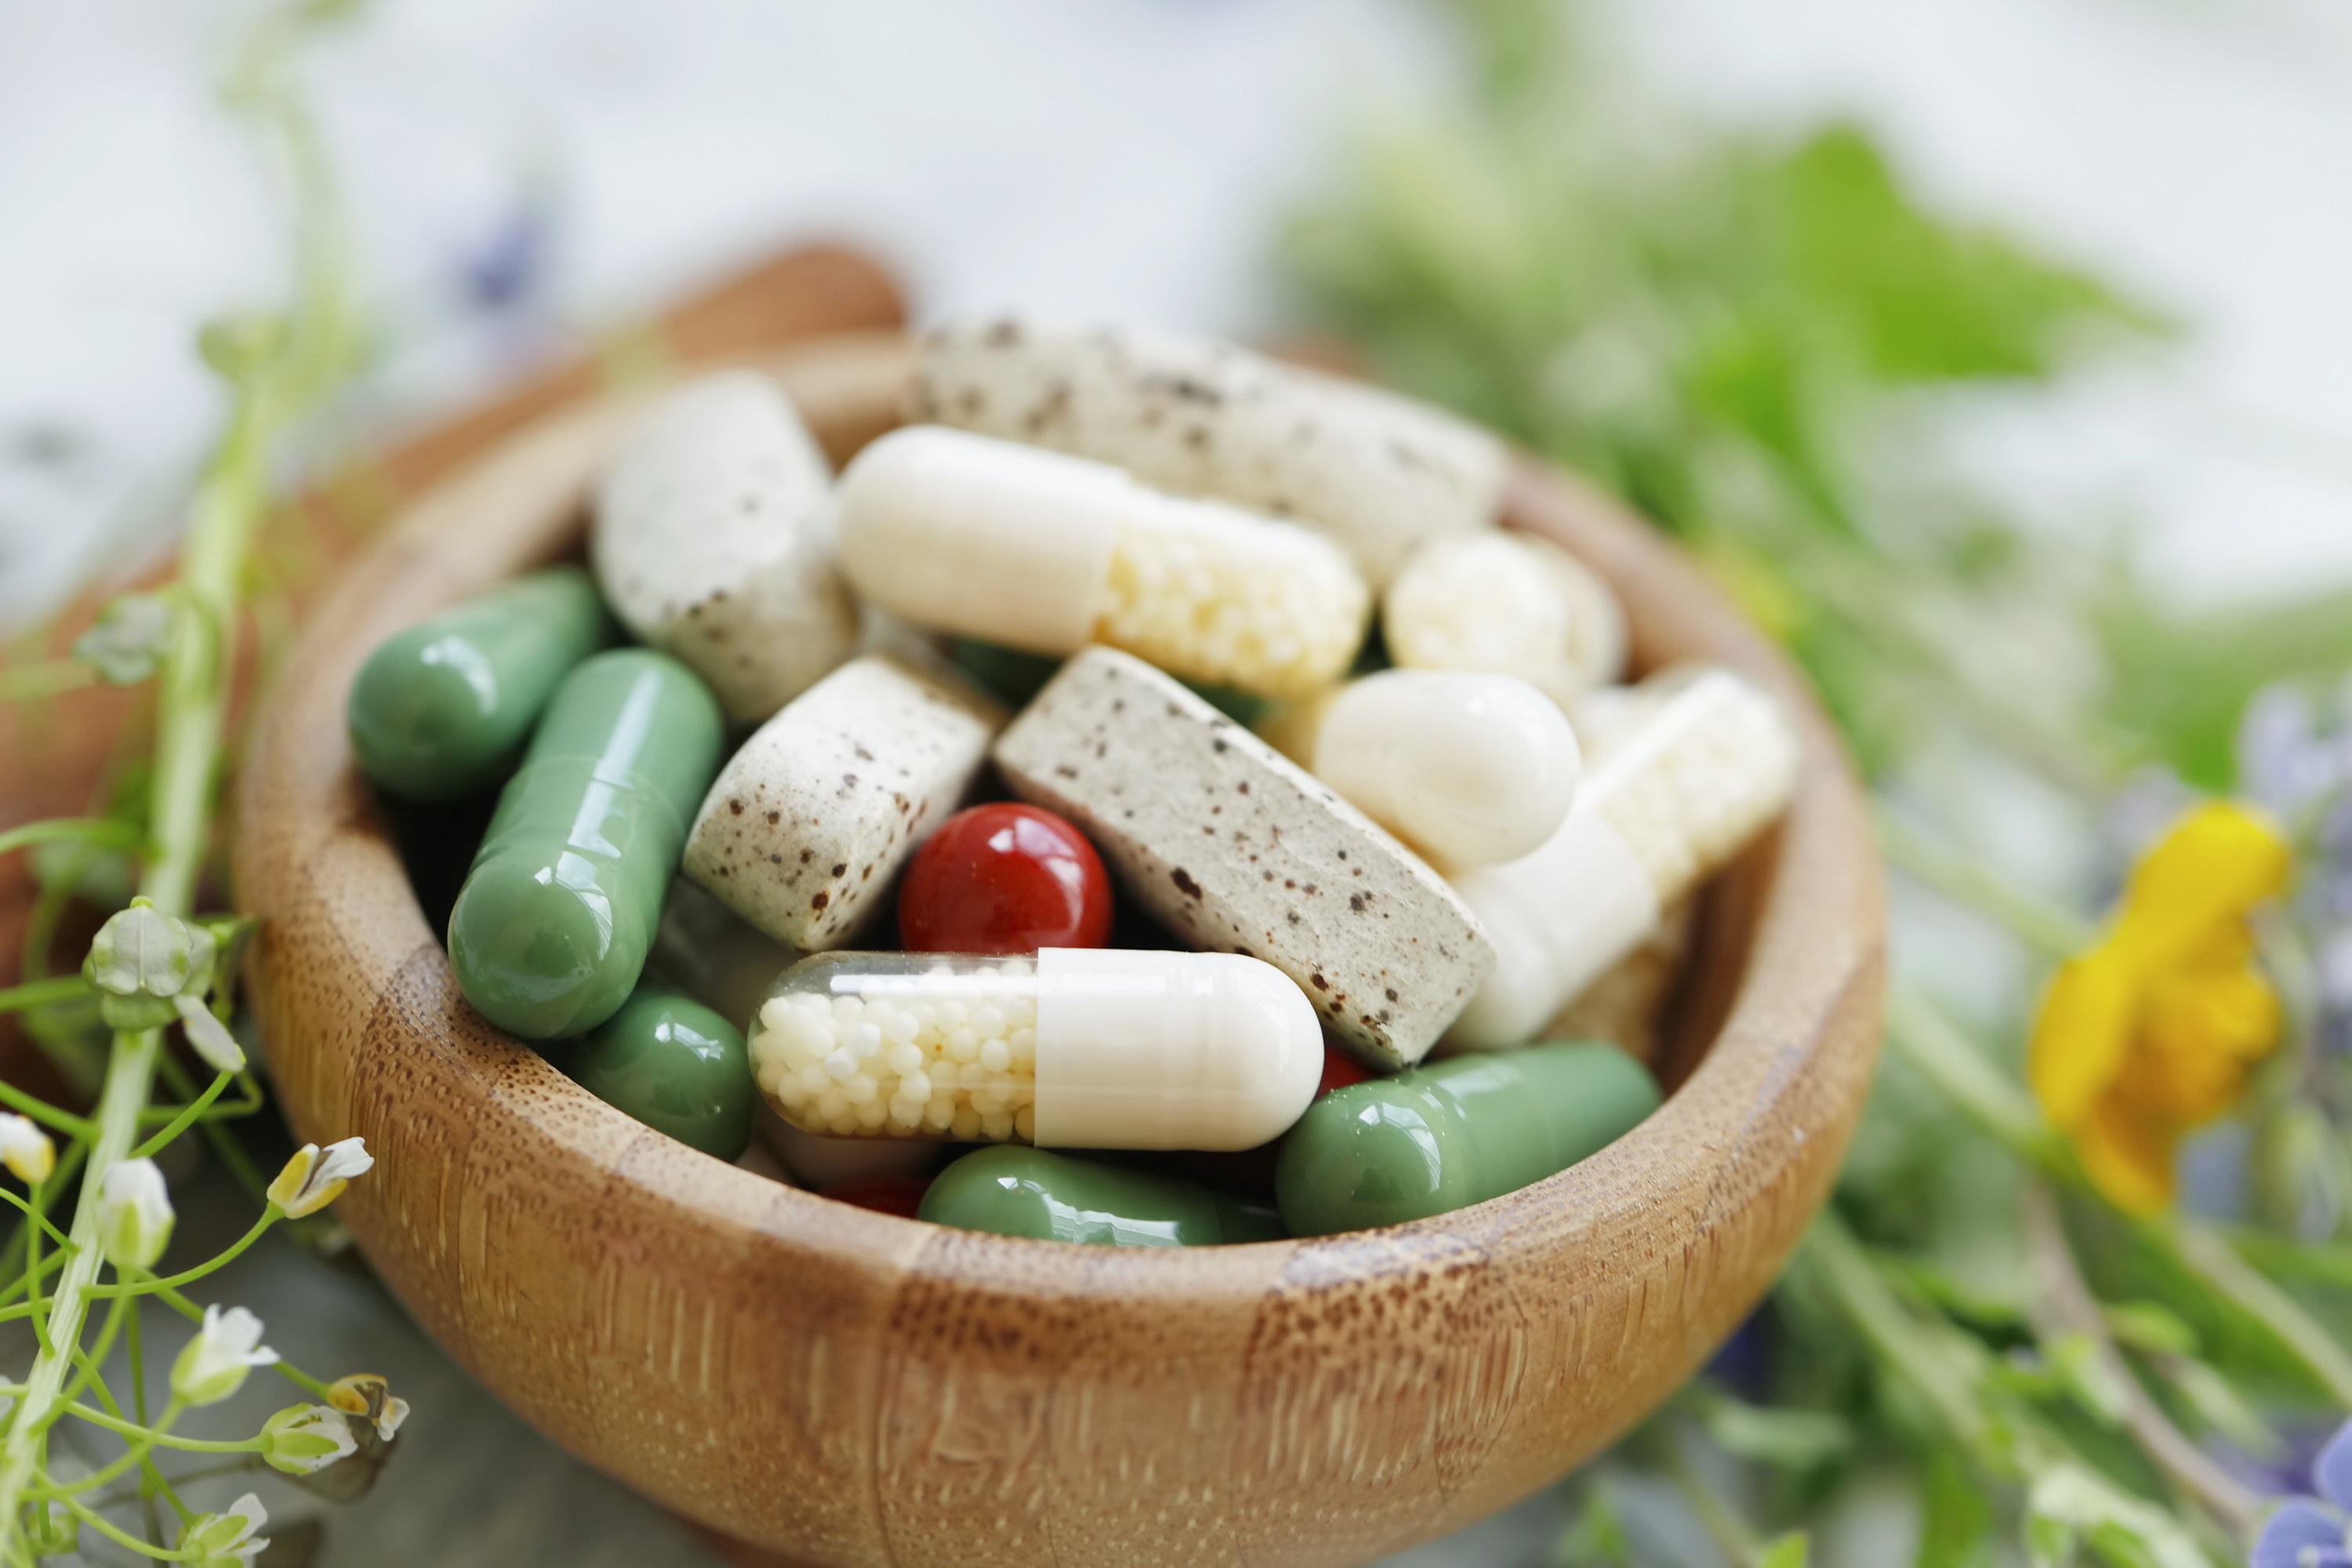 Natural suplements pills, alternative medicine with herbal plants extracts pills, herbal medicine, homeopathy organic super food suplements (Foto: Getty Images/iStockphoto)